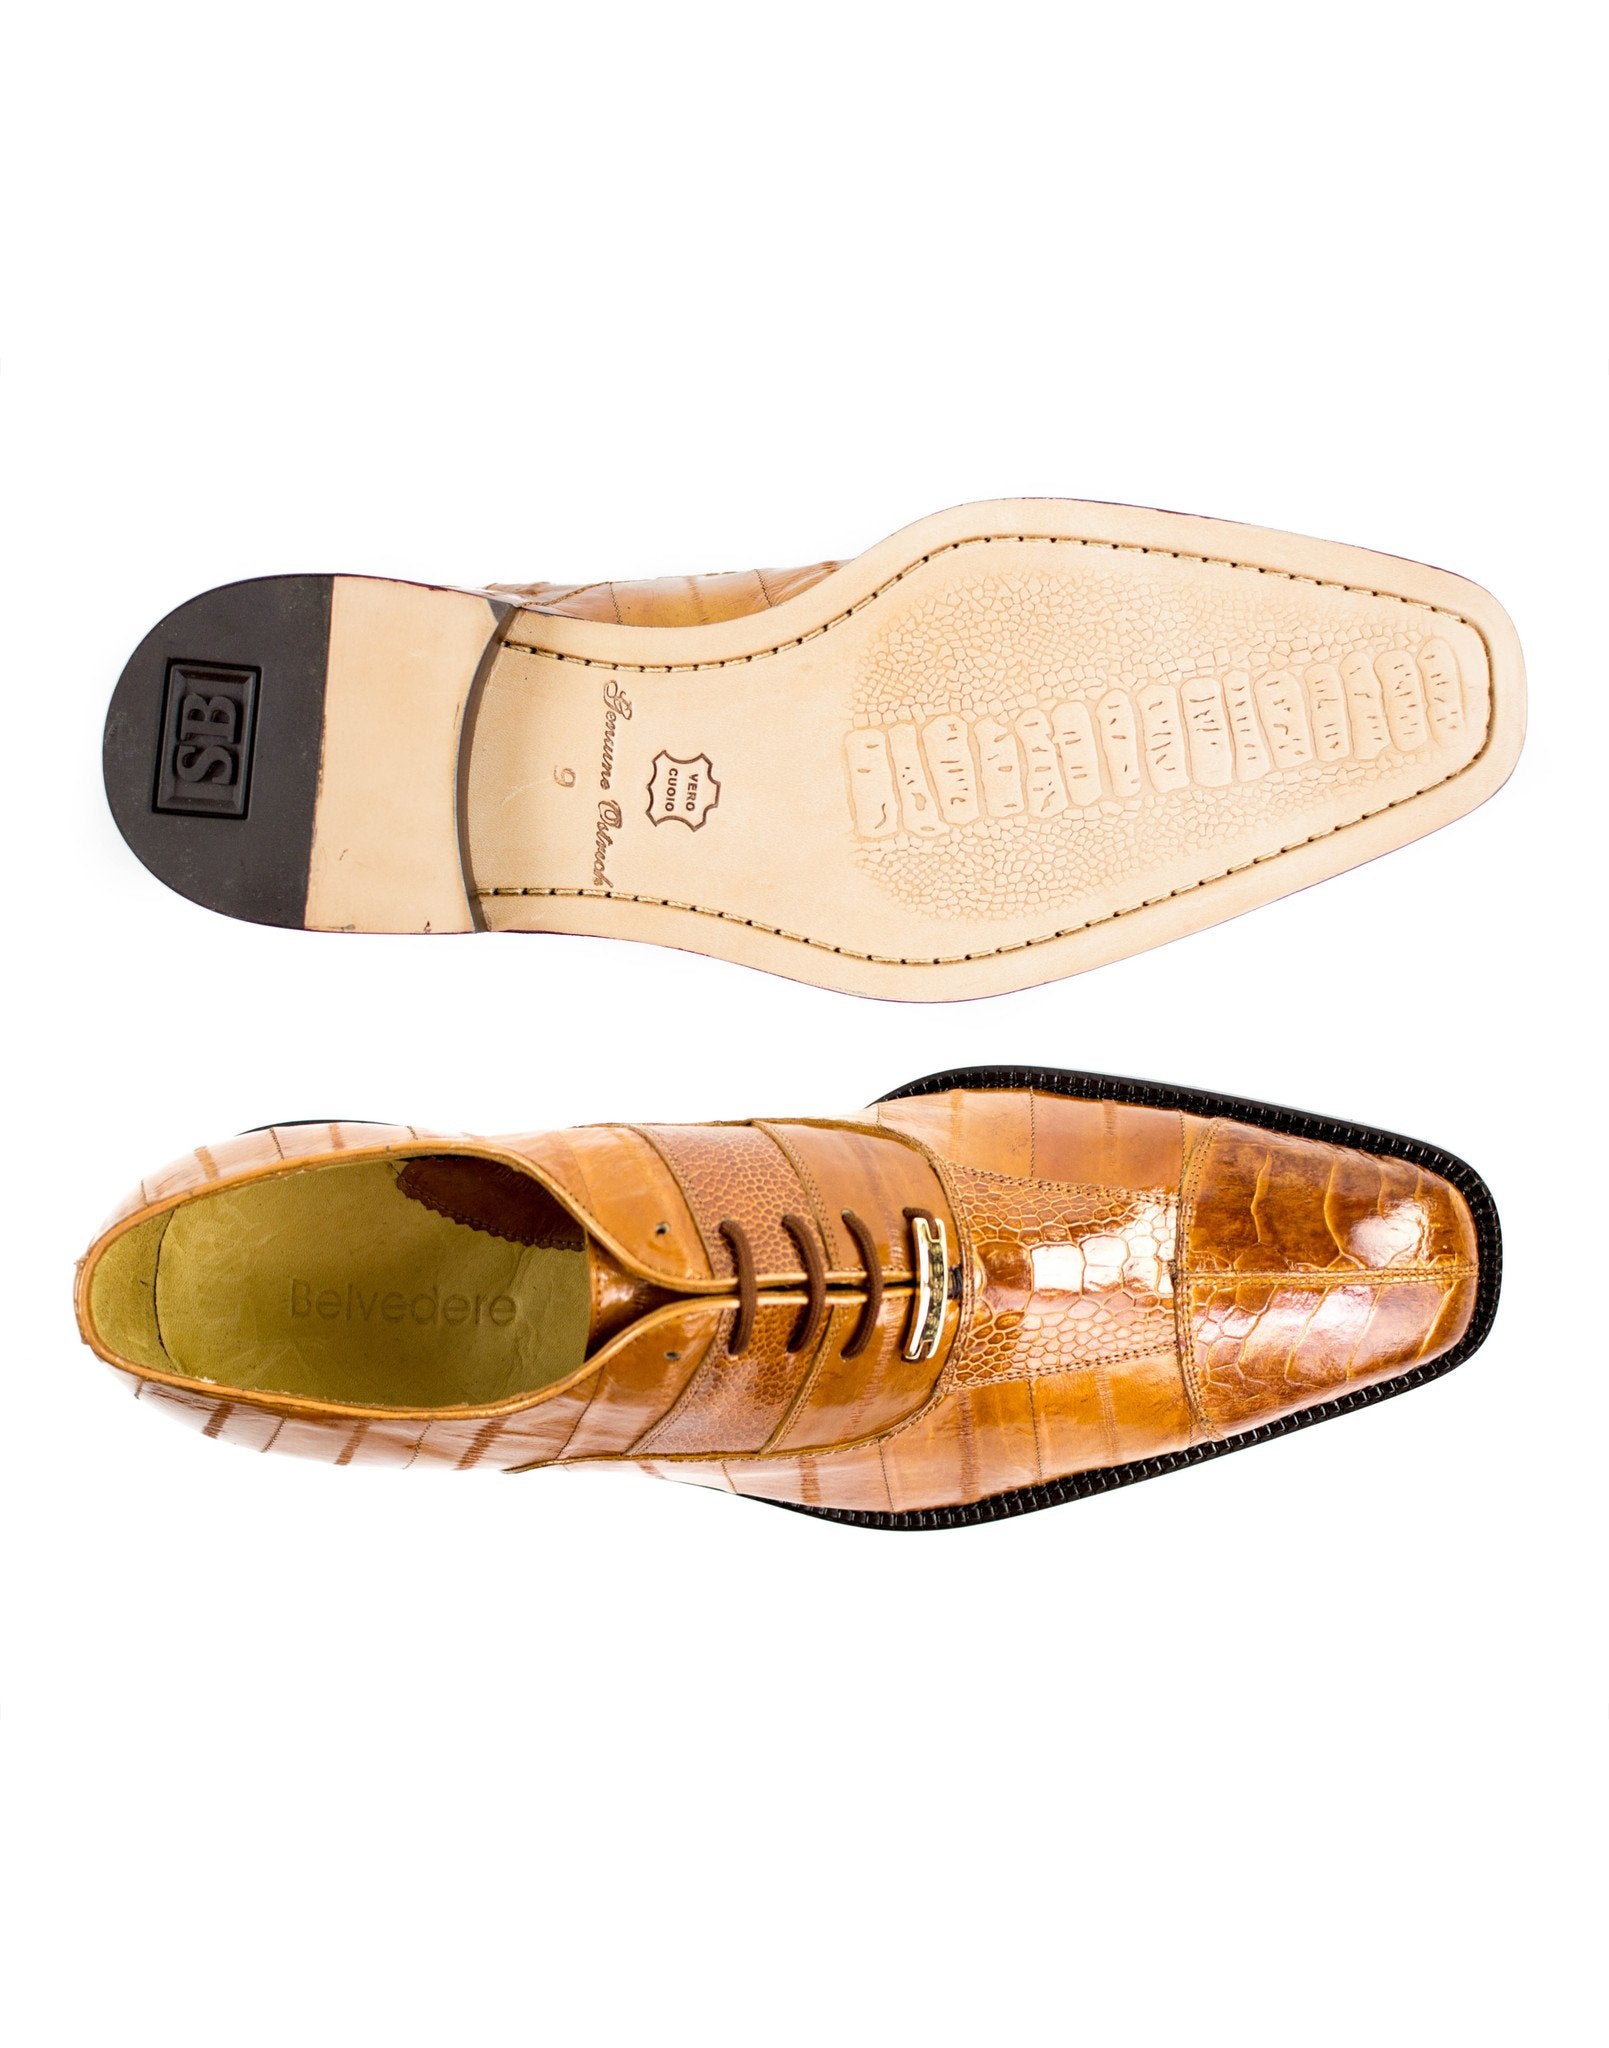 Belvedere - Mare, Genuine Ostrich and Eel Dress Shoe - Camel - 2P7 - IN STORE